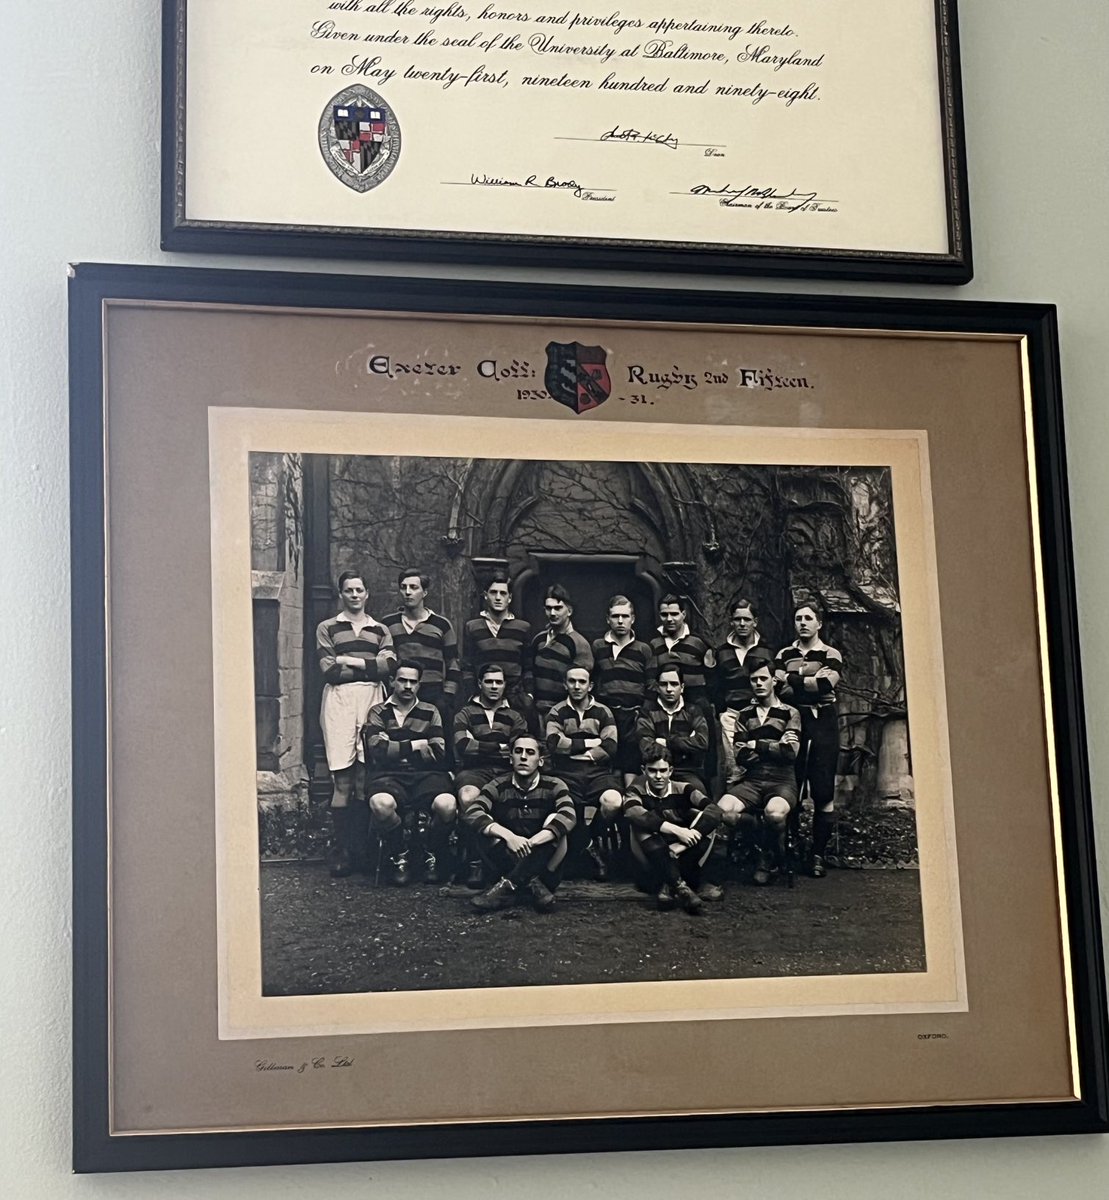 Old Chinese proverb: He who swaps studies with his wife for a bit and is waiting for Donald Trump to lie to reporters will occasionally look at the picture of his wife’s American grandad in the Exeter College 2nd XV of 1930-31 (2nd right, front row) and think it is well cool.